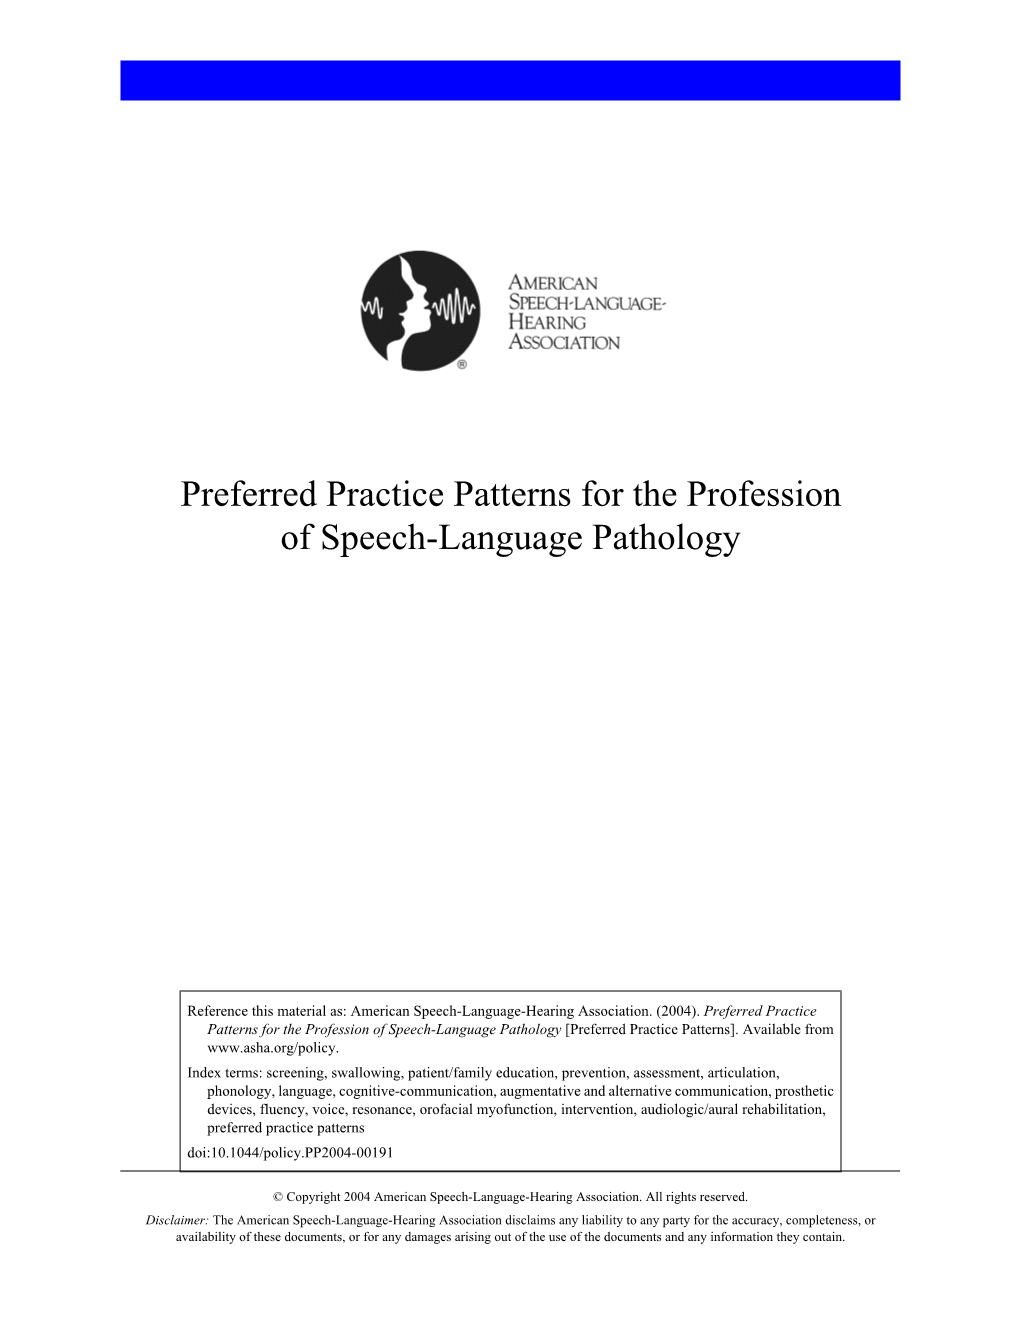 Preferred Practice Patterns for the Profession of Speech-Language Pathology